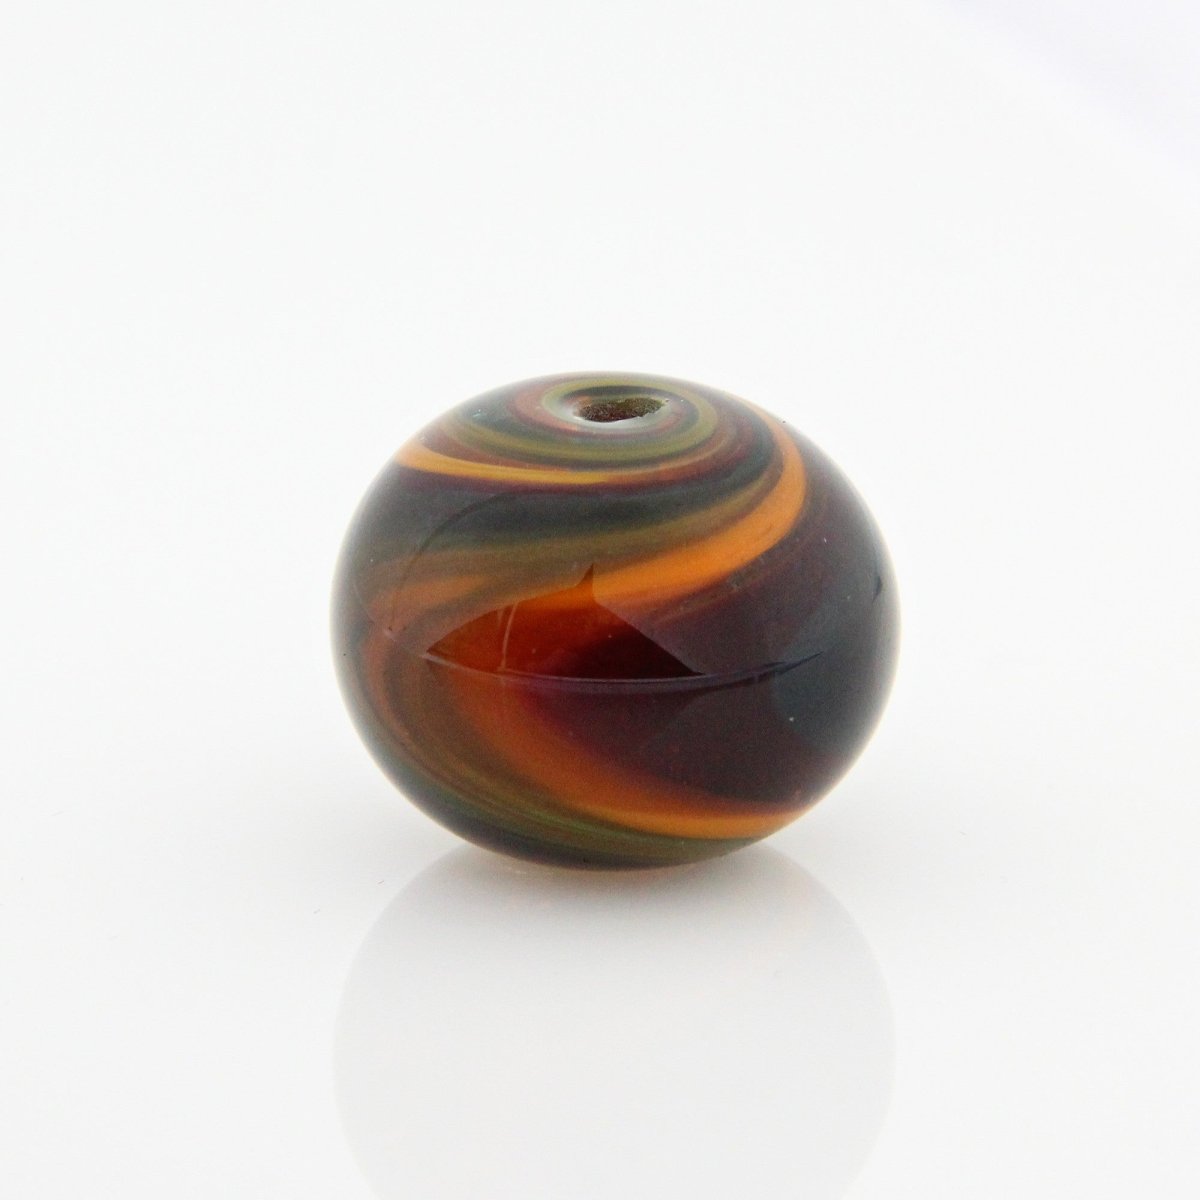 Teal, Red, and Orange Striped Statement Bead - Handmade Glass Lampwork, Unique Focal Bead for Pendant, Suncatcher, or Home Decorating